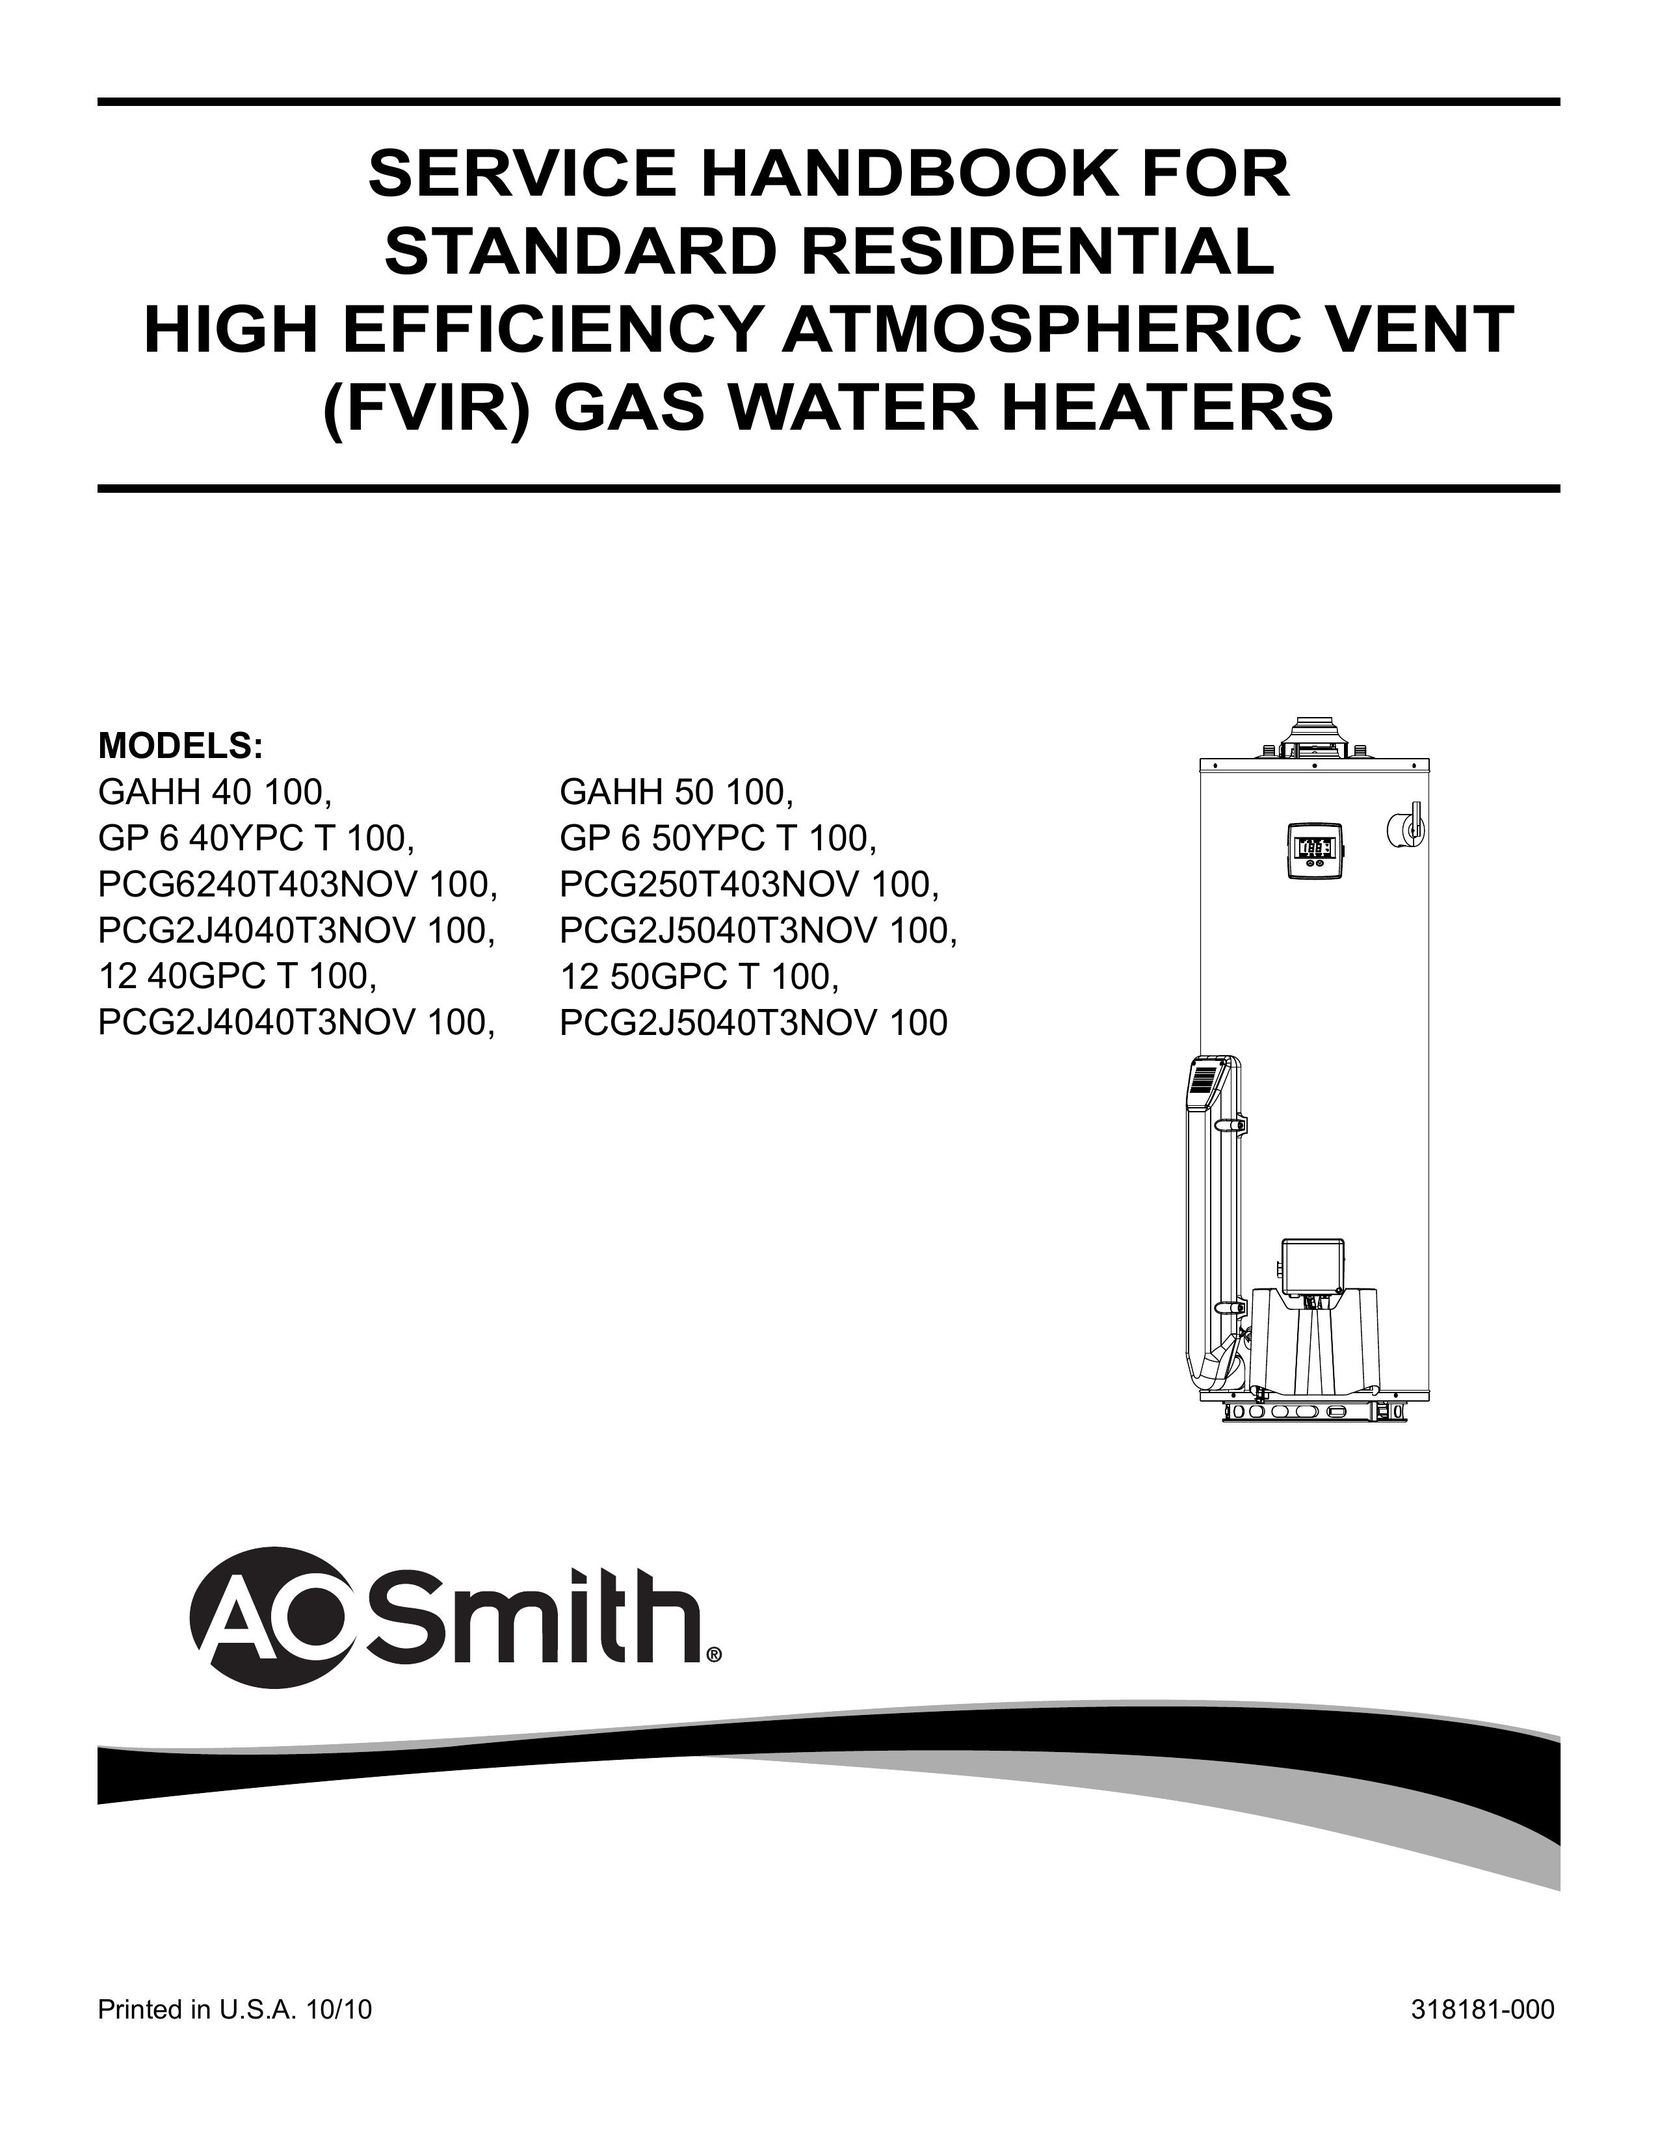 A.O. Smith 12 40GPC T 100 Water Heater User Manual